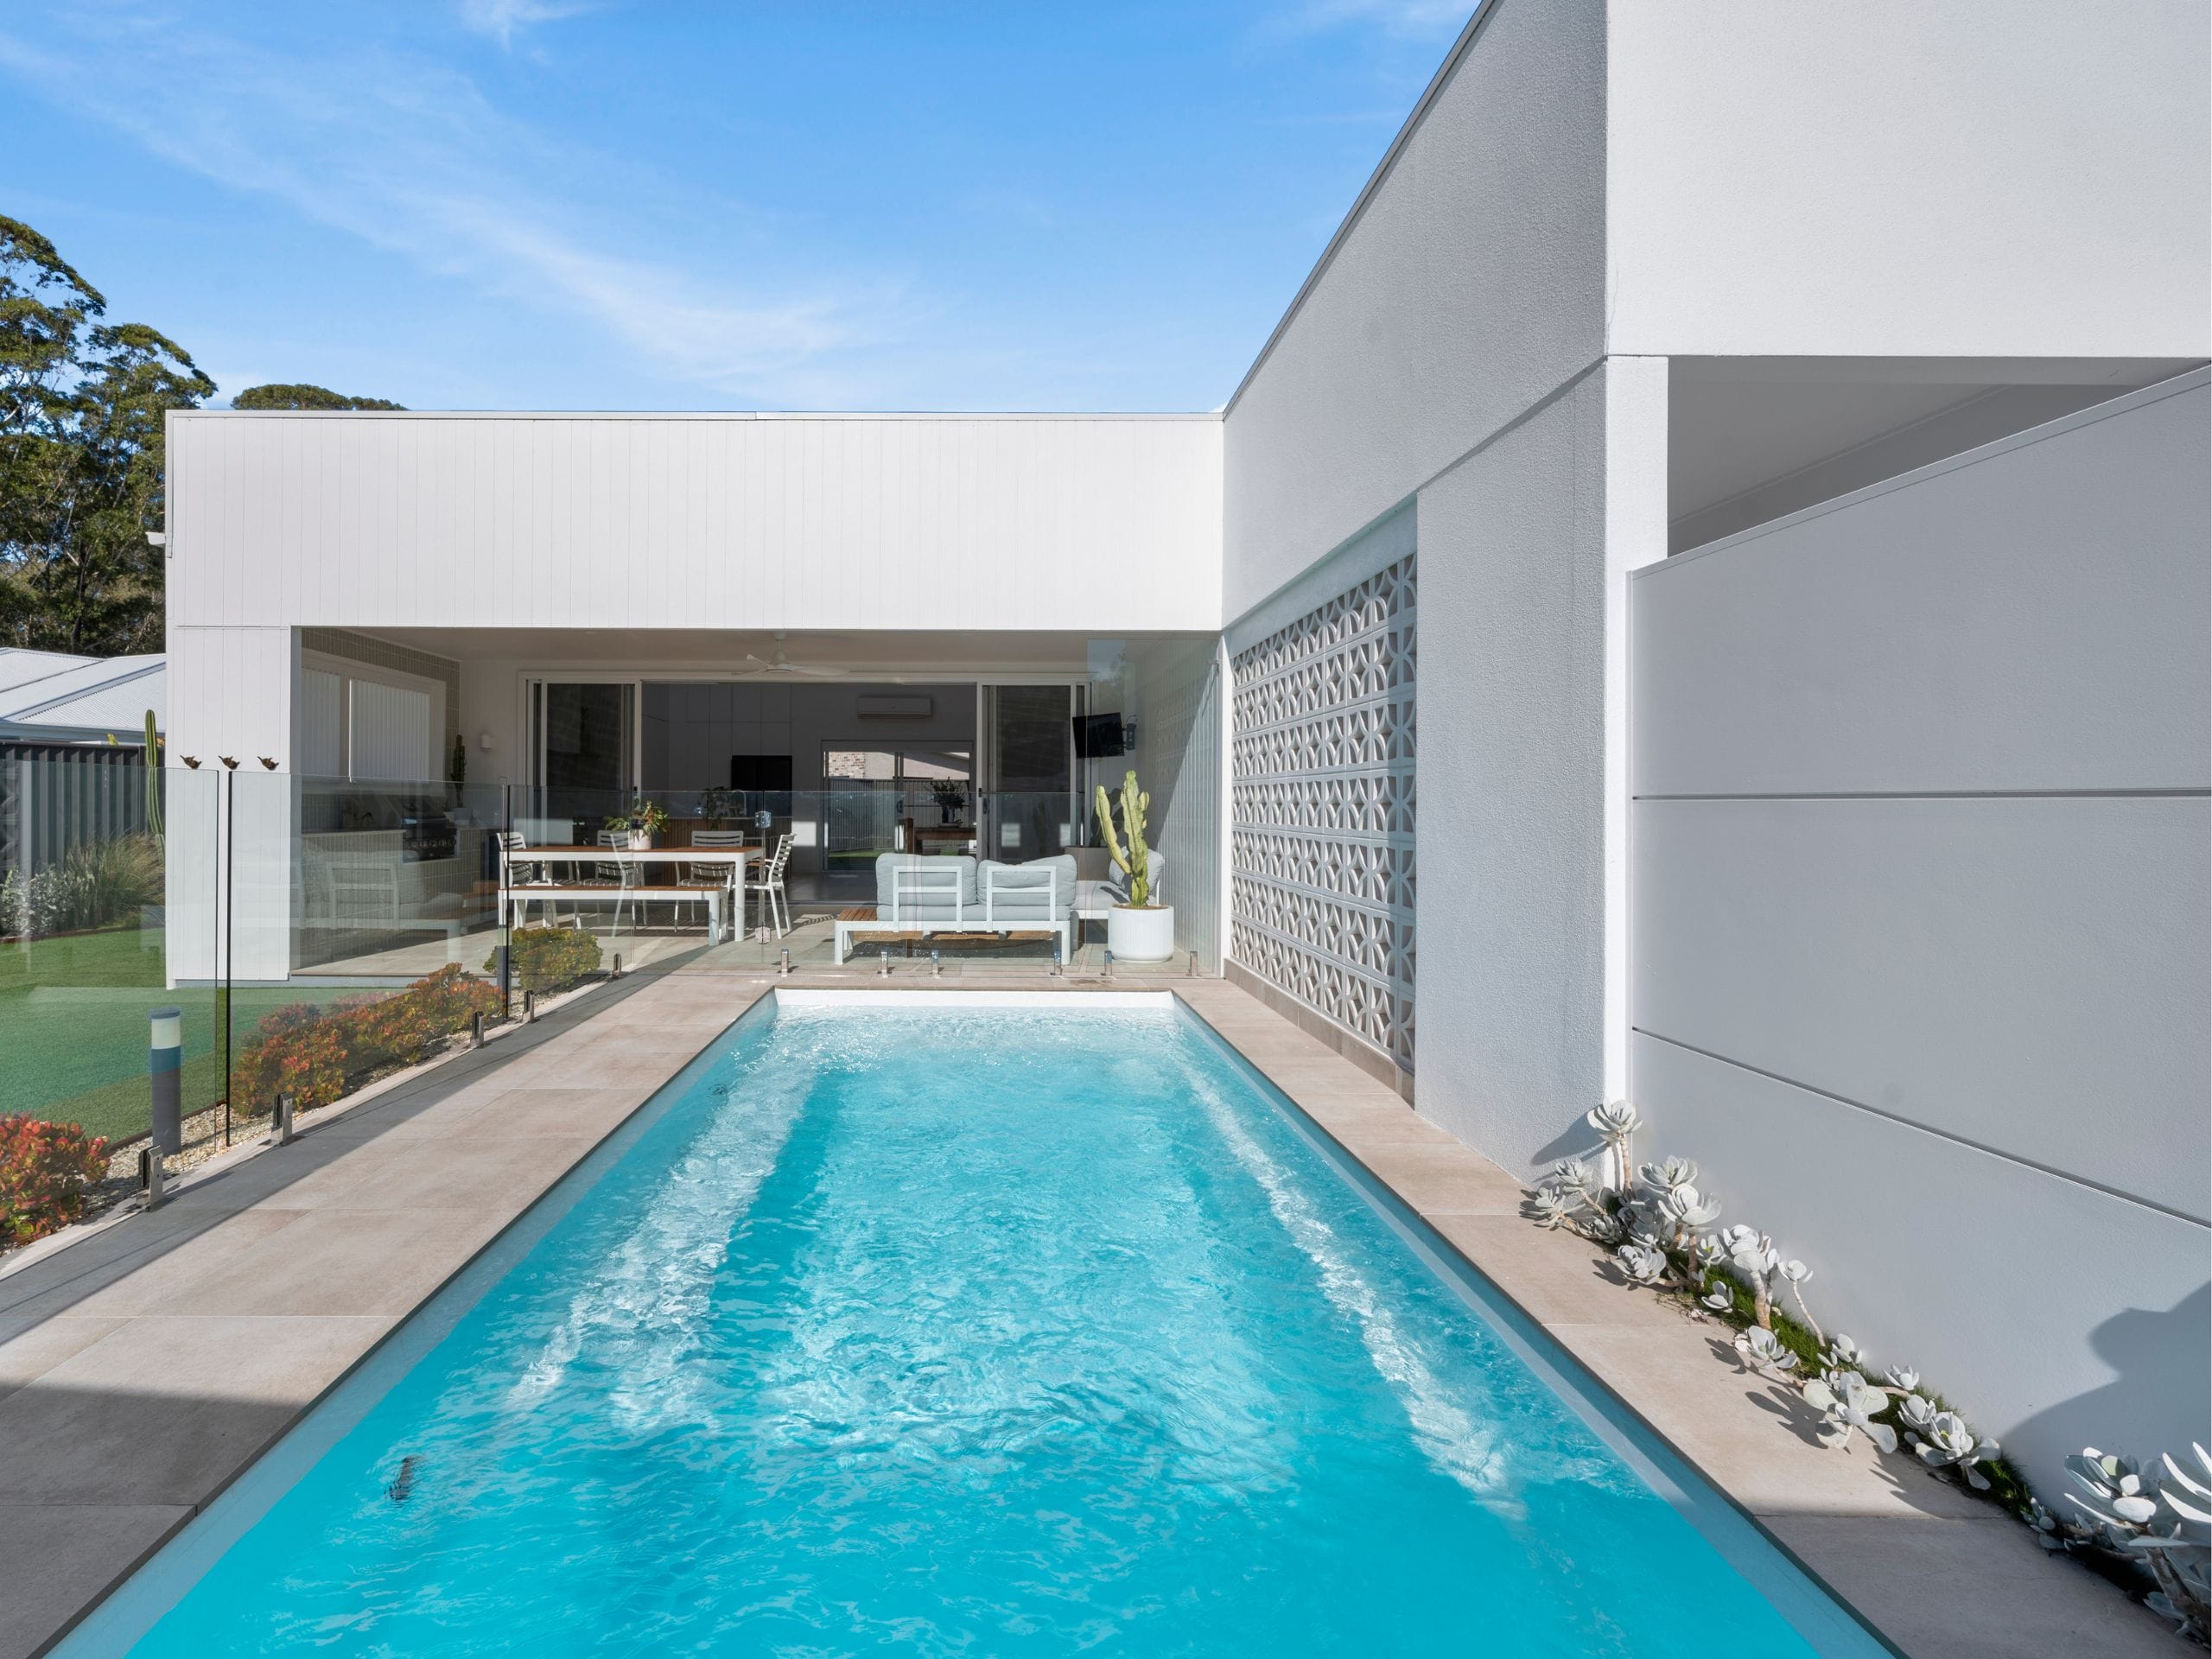 Minimalist pool to frame the geometric shapes of the home's facade